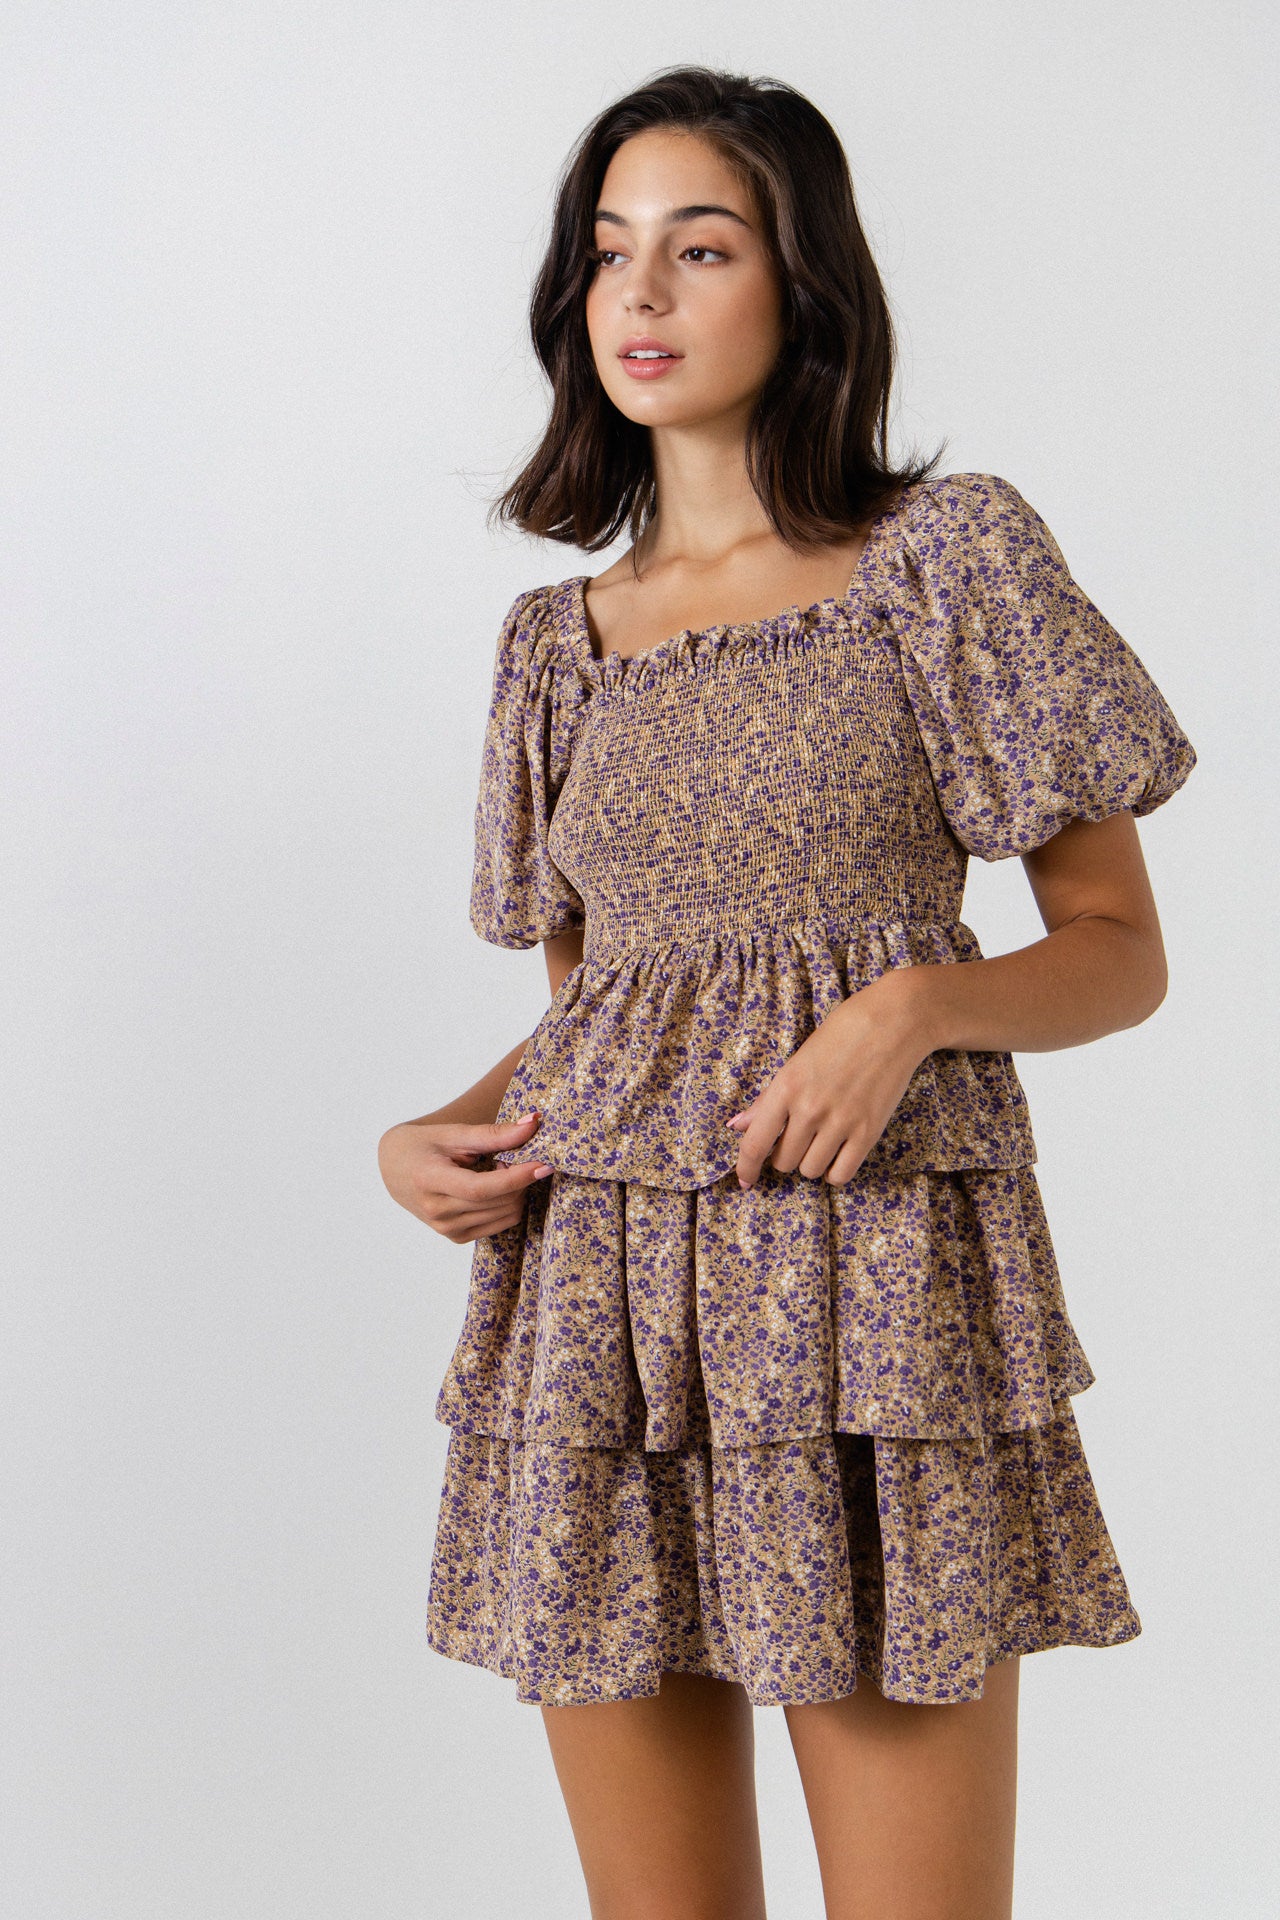 FREE THE ROSES - Puff Sleeve Ruffled Mini Dress - DRESSES available at Objectrare